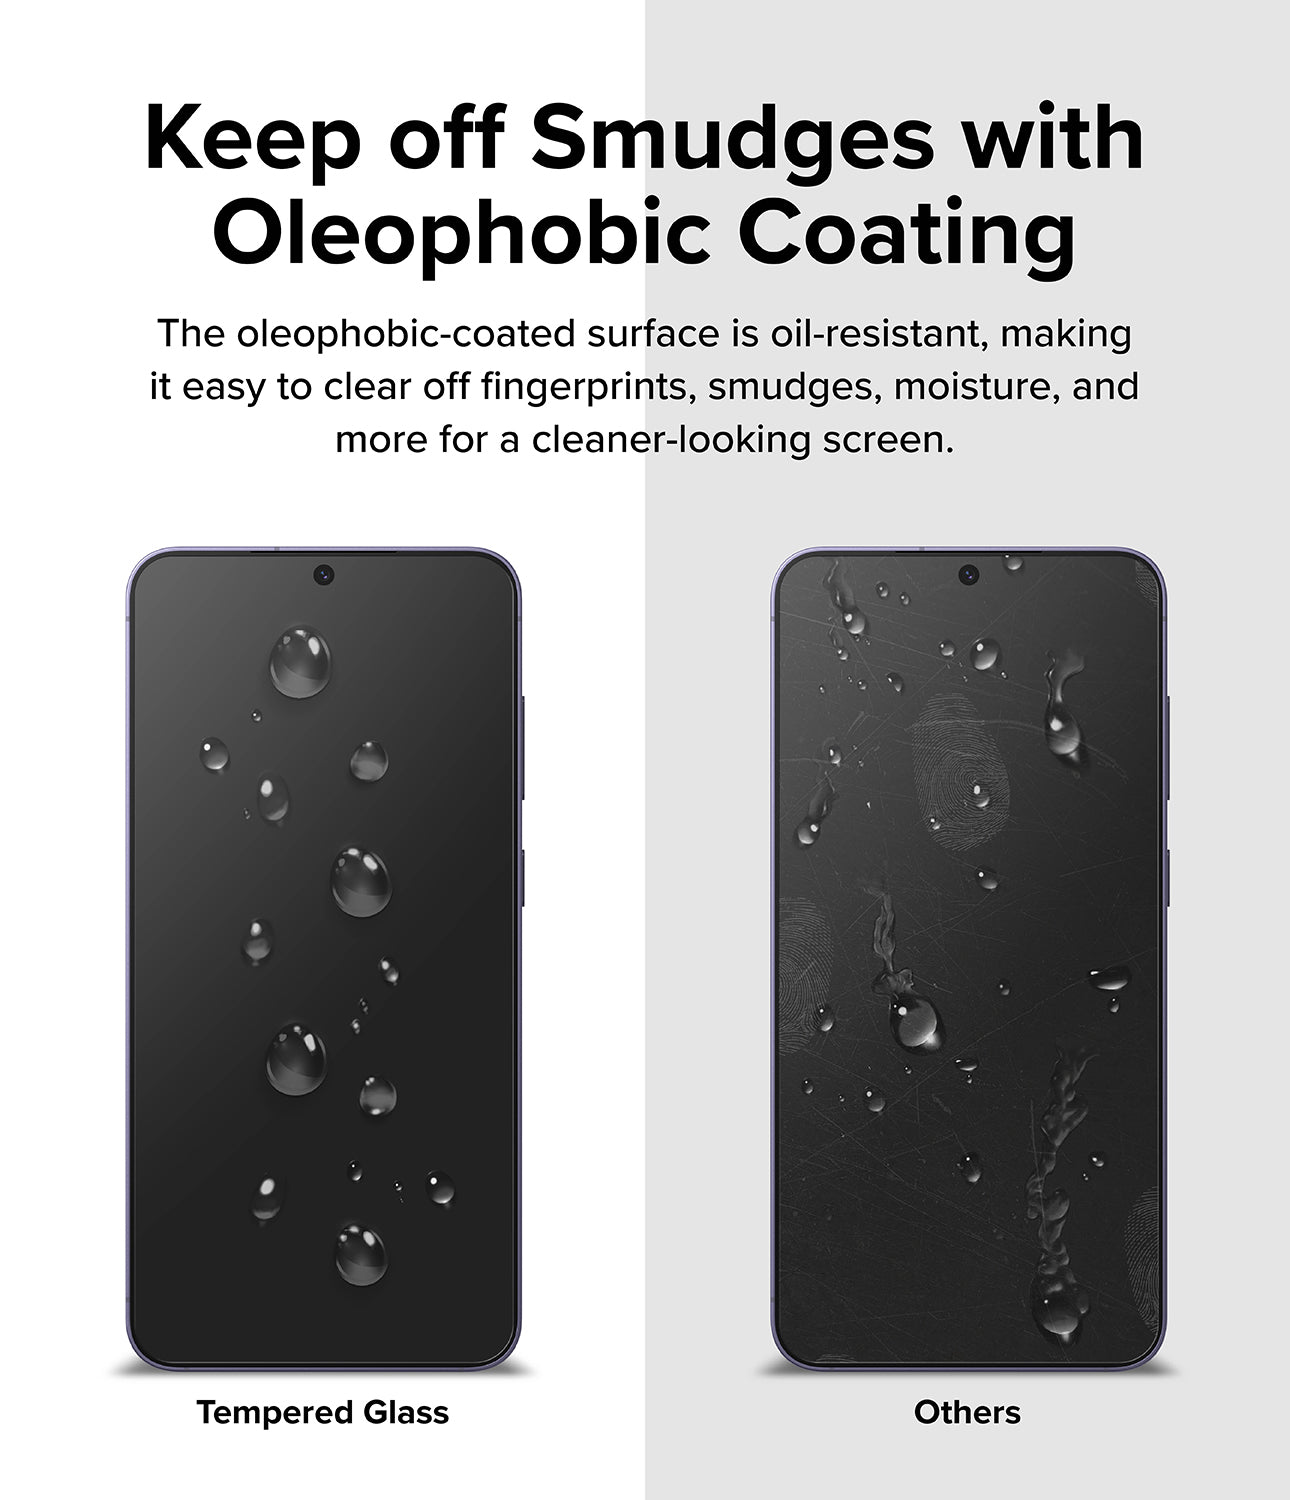 Galaxy S24 Plus Screen Protector | Easy Slide Tempered Glass - Keep off Smudges with Oleophobic Coating. The oleophobic-coated surface is oil-resistant, making it easy to clear off fingerprints, smudges, moisture, and more for a cleaner-looking screen.